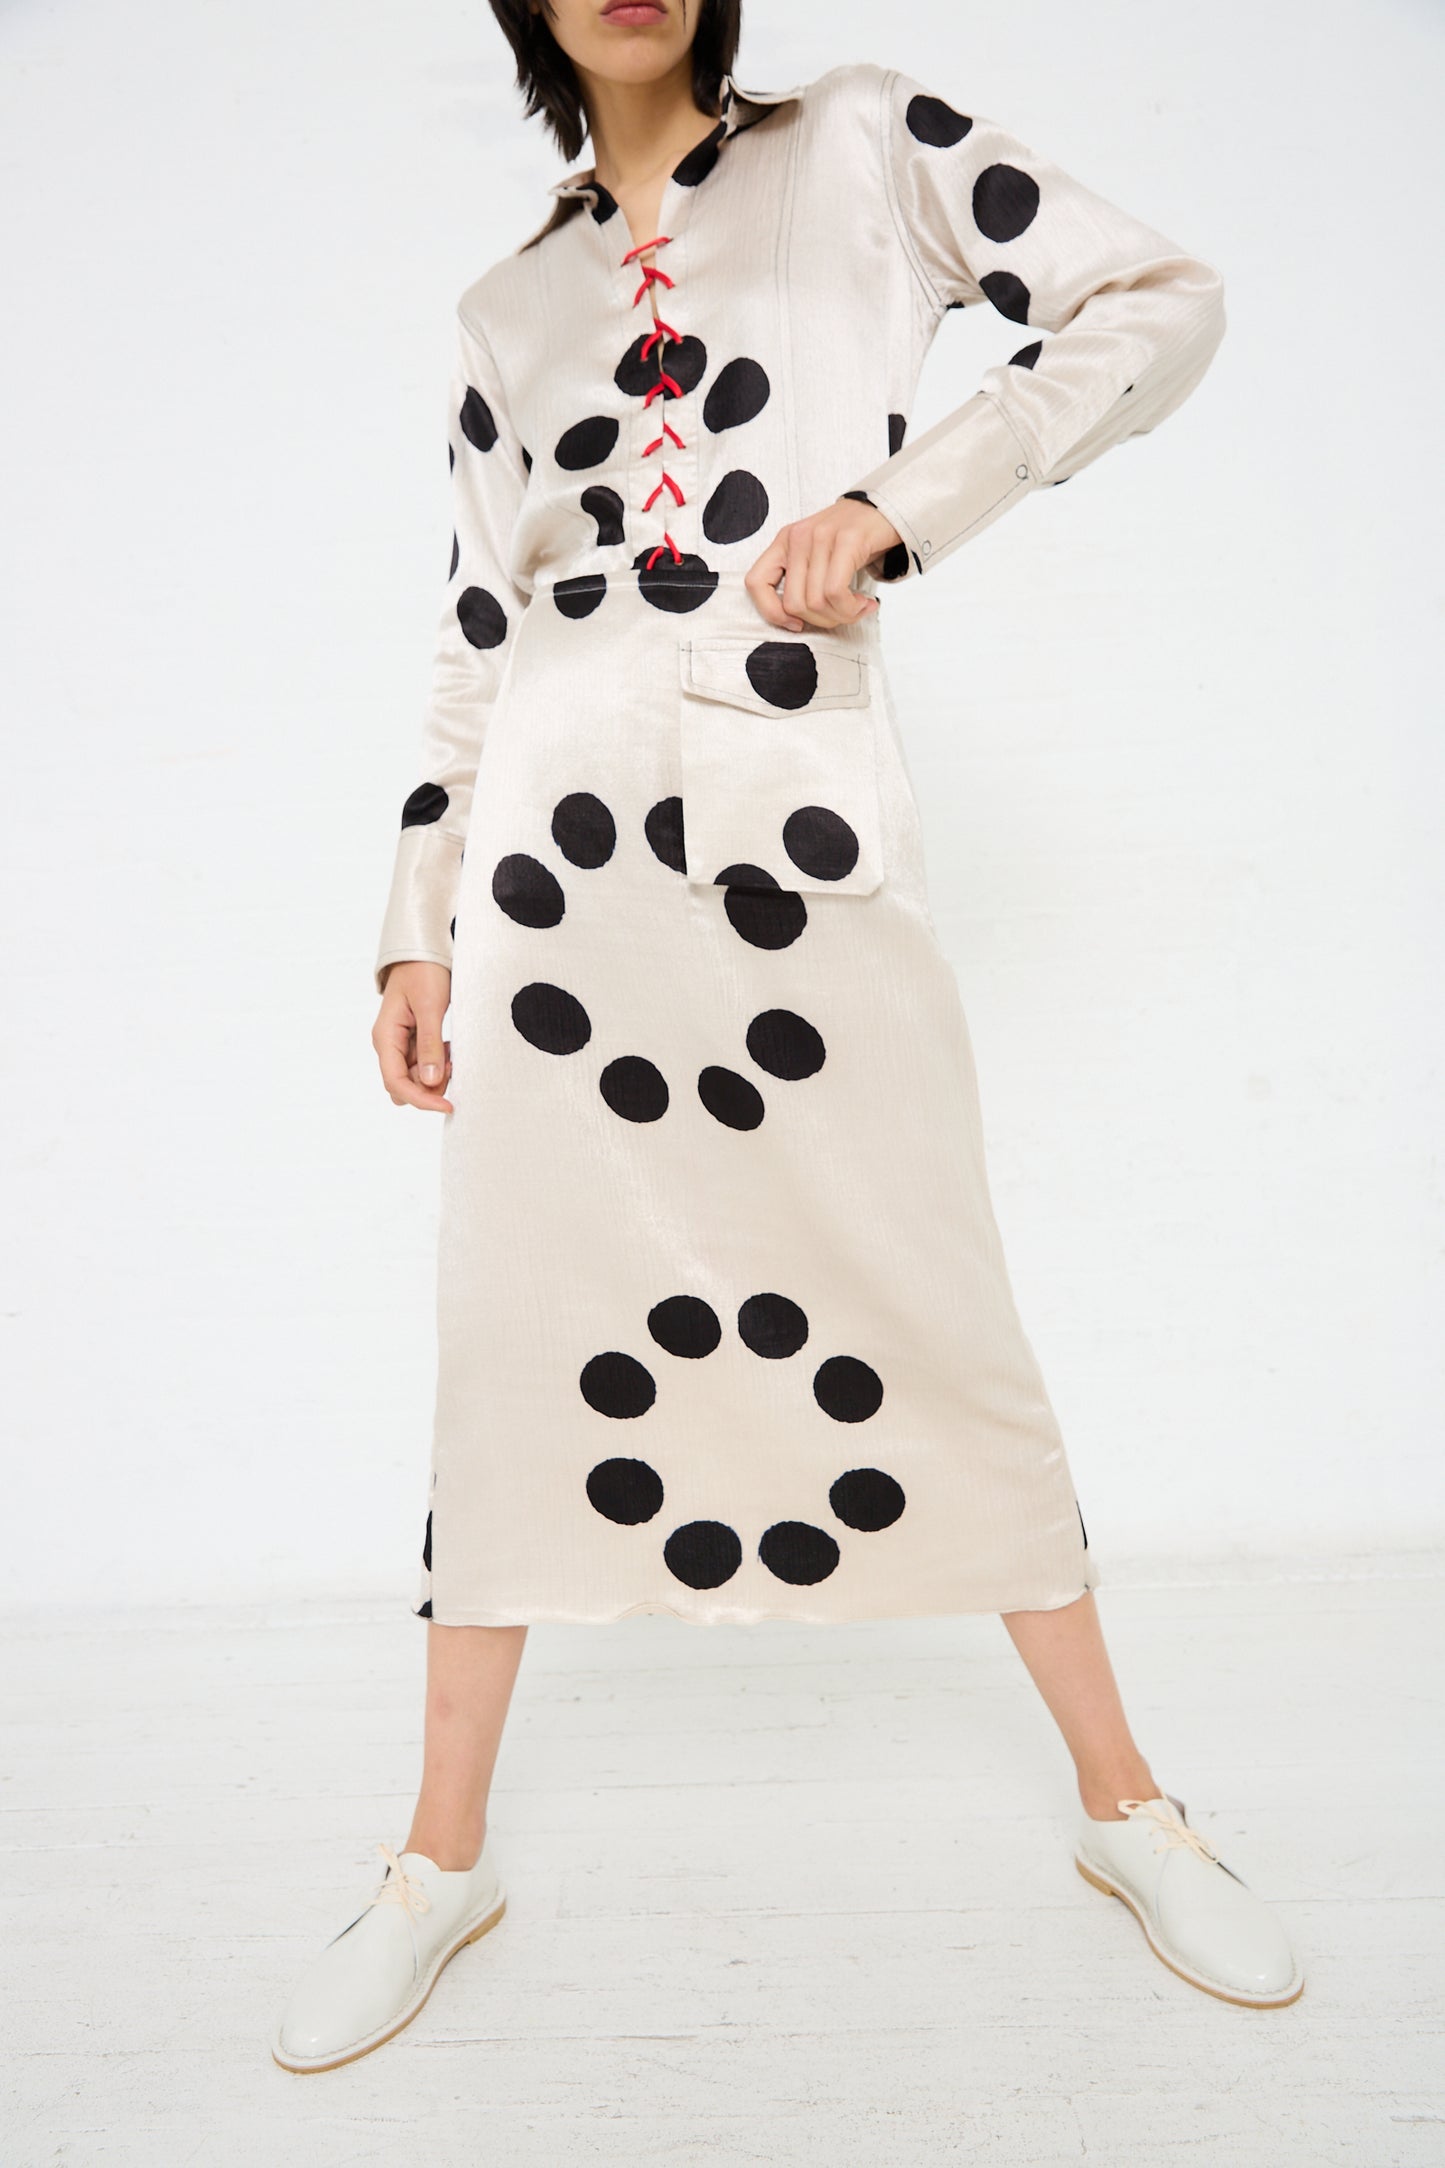 Person wearing a beige Silk Mashroo Midi Skirt by TIGRA TIGRA with large black polka dots and red lace-up detail, paired with white shoes. The skirt, featuring contrast topstitching, has long sleeves and a pocket.